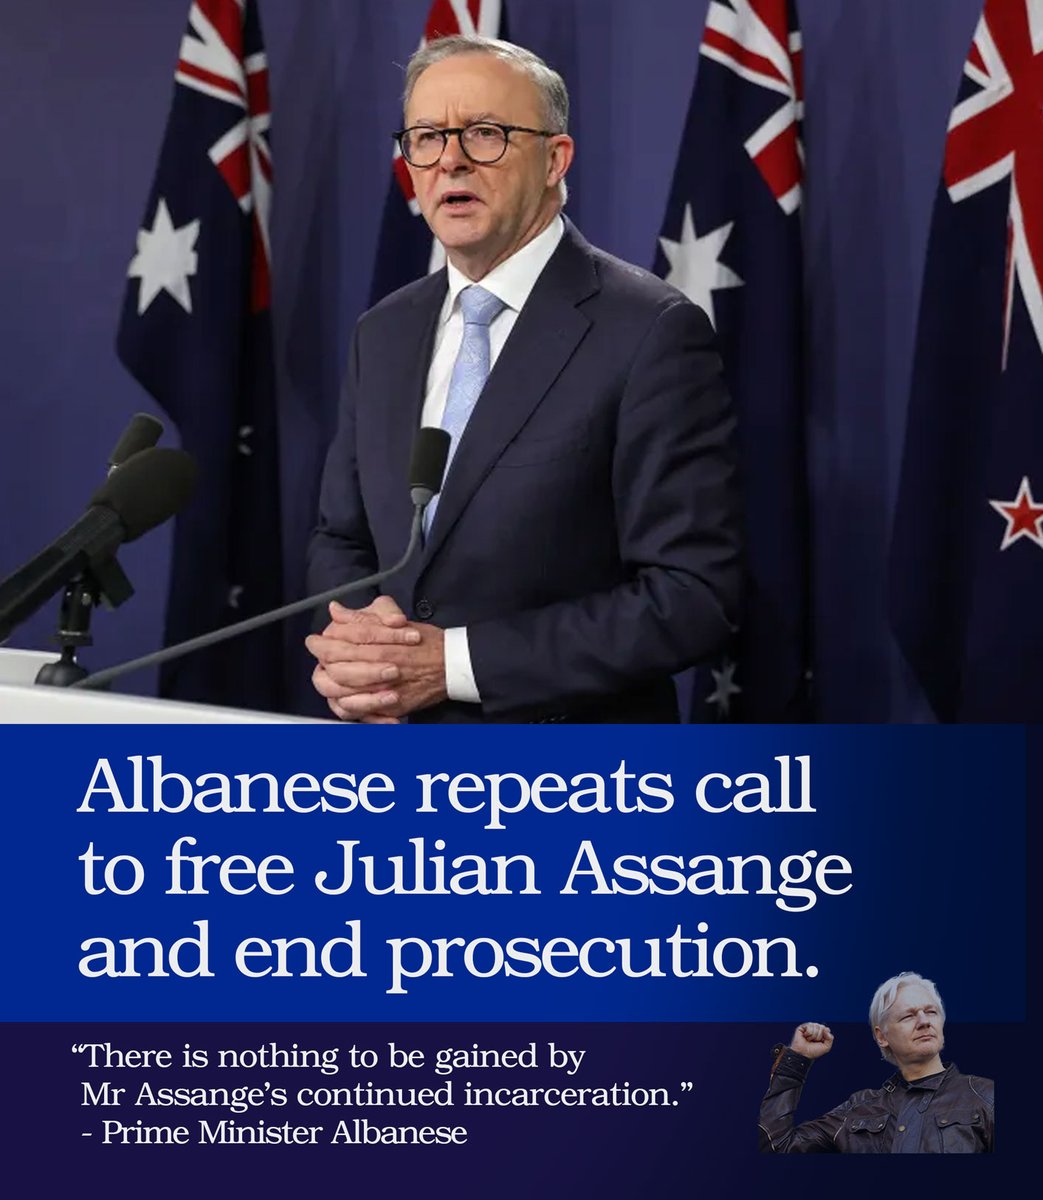 Albanese repeats his call for US to release Julian Assange. “I believe this must be brought to a conclusion and Mr Assange has already paid a significant price and enough is enough. There is nothing to be gained by Mr Assange’s continued incarceration' Albanese said on Sky News